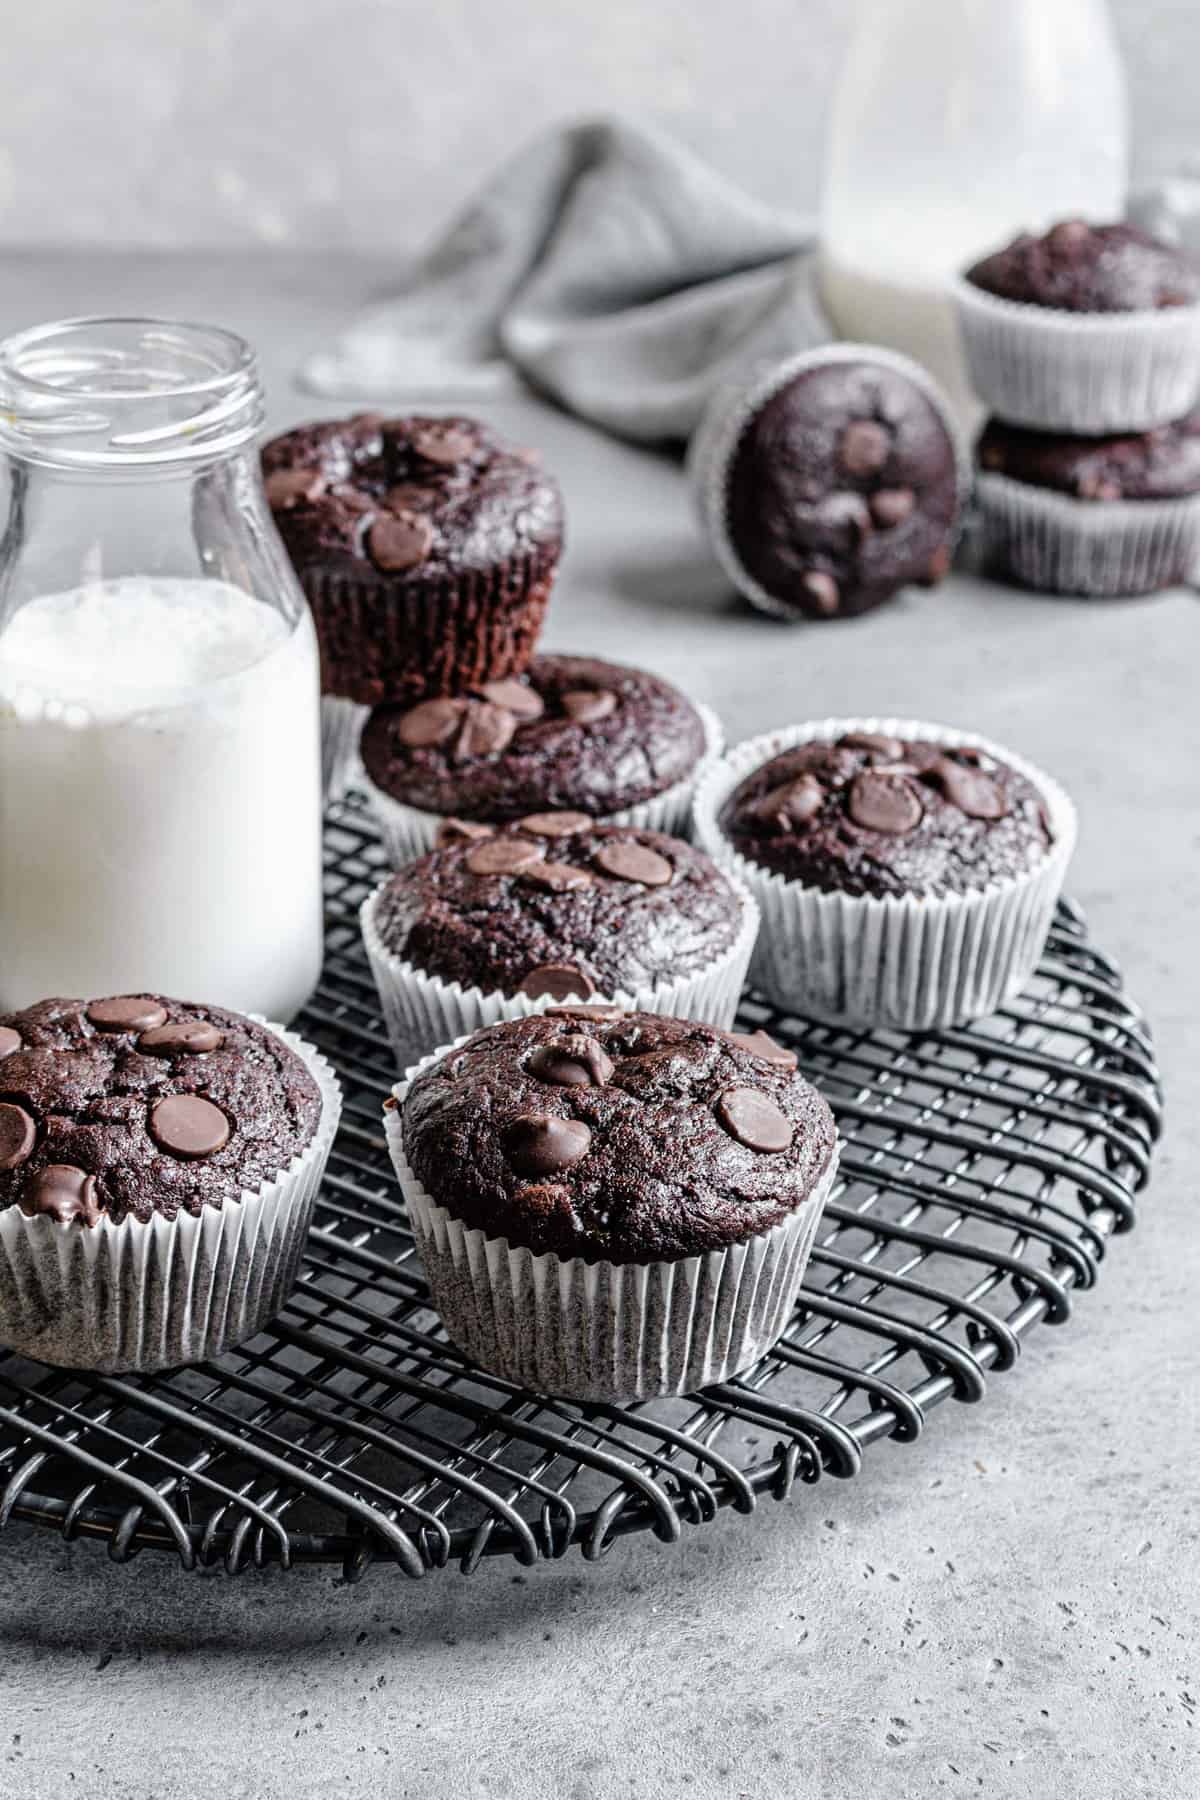 muffins on a rack with a bottle of milk